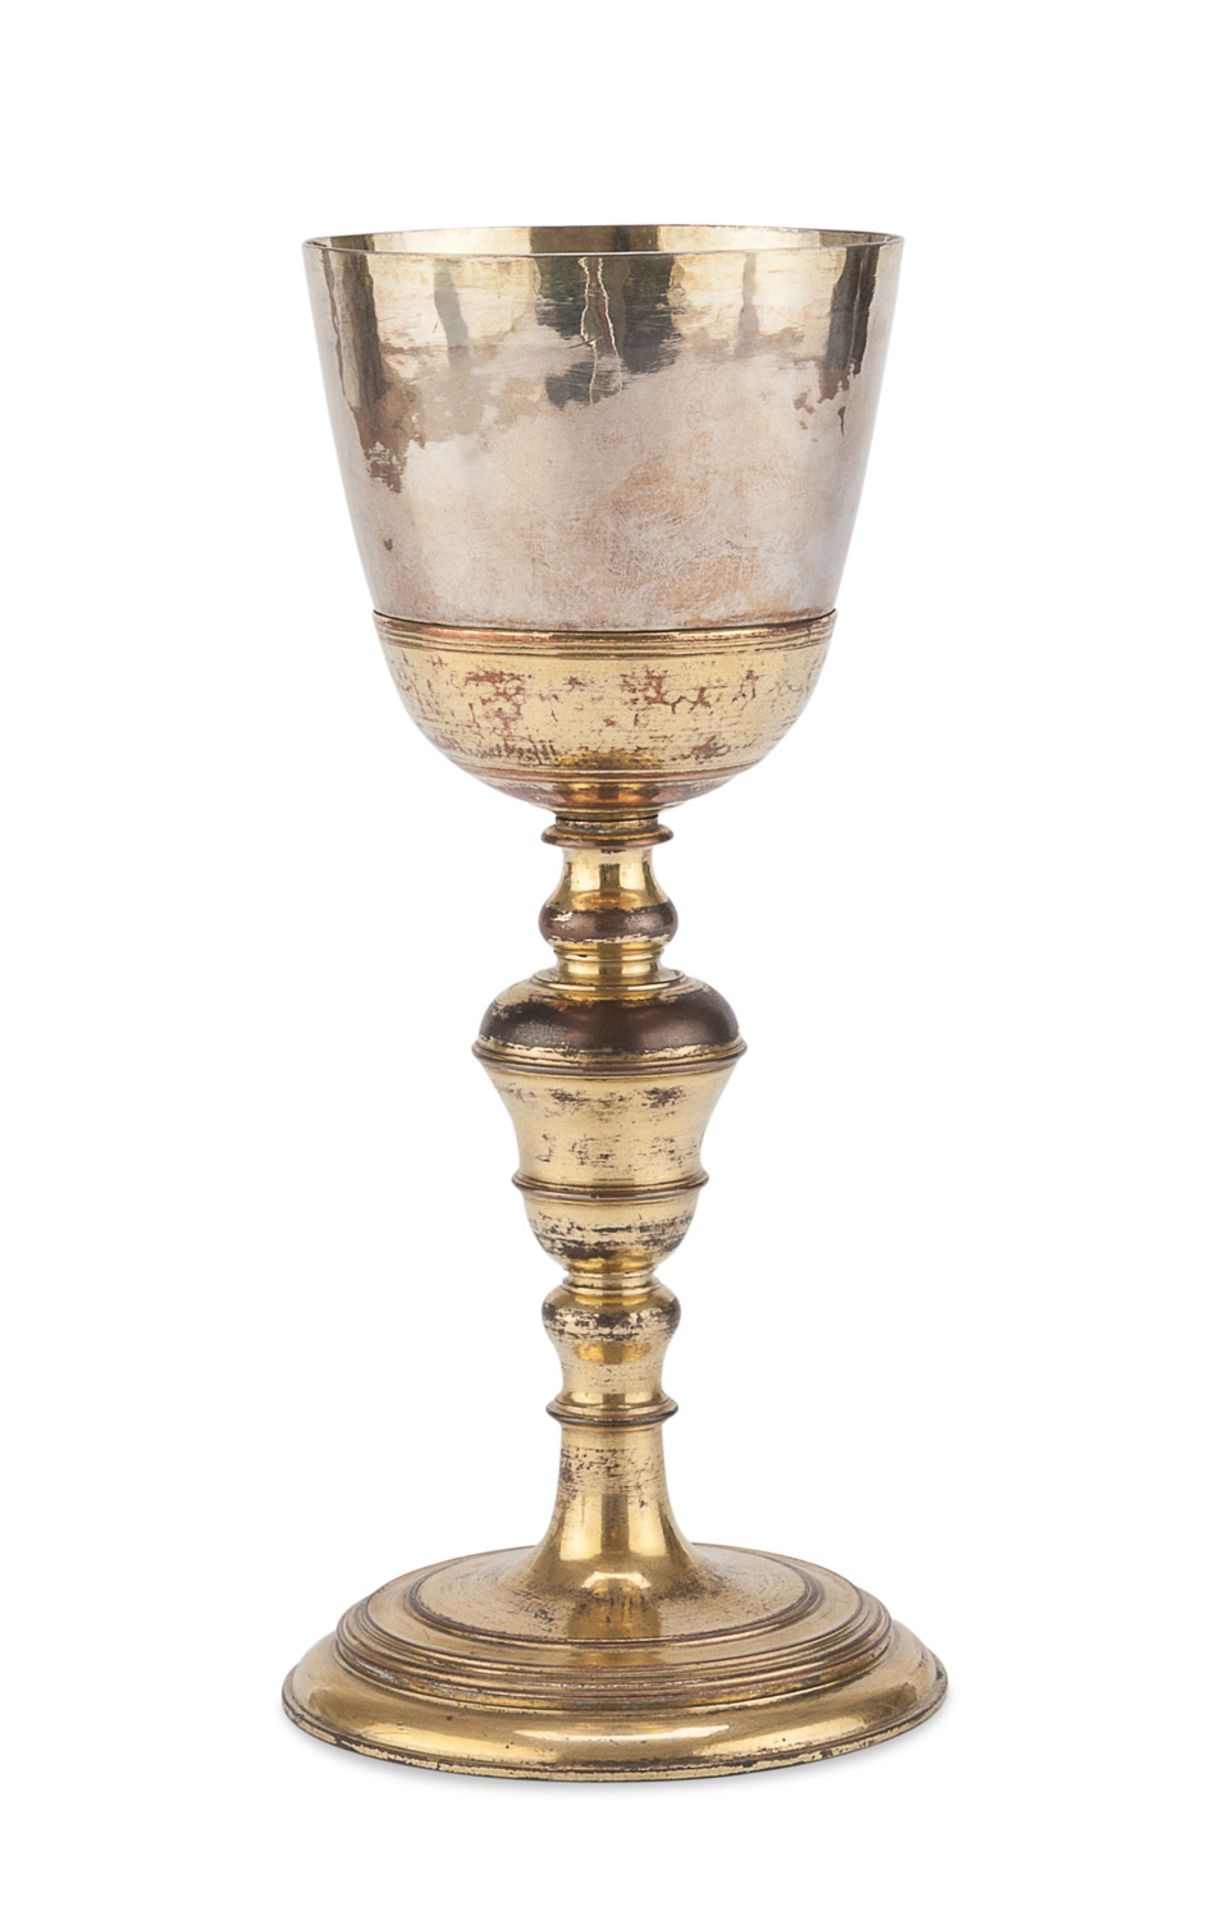 EUCHARISTIC CHALICE IN SILVER AND GILDED COPPER PROBABLY ROME 18th CENTURY